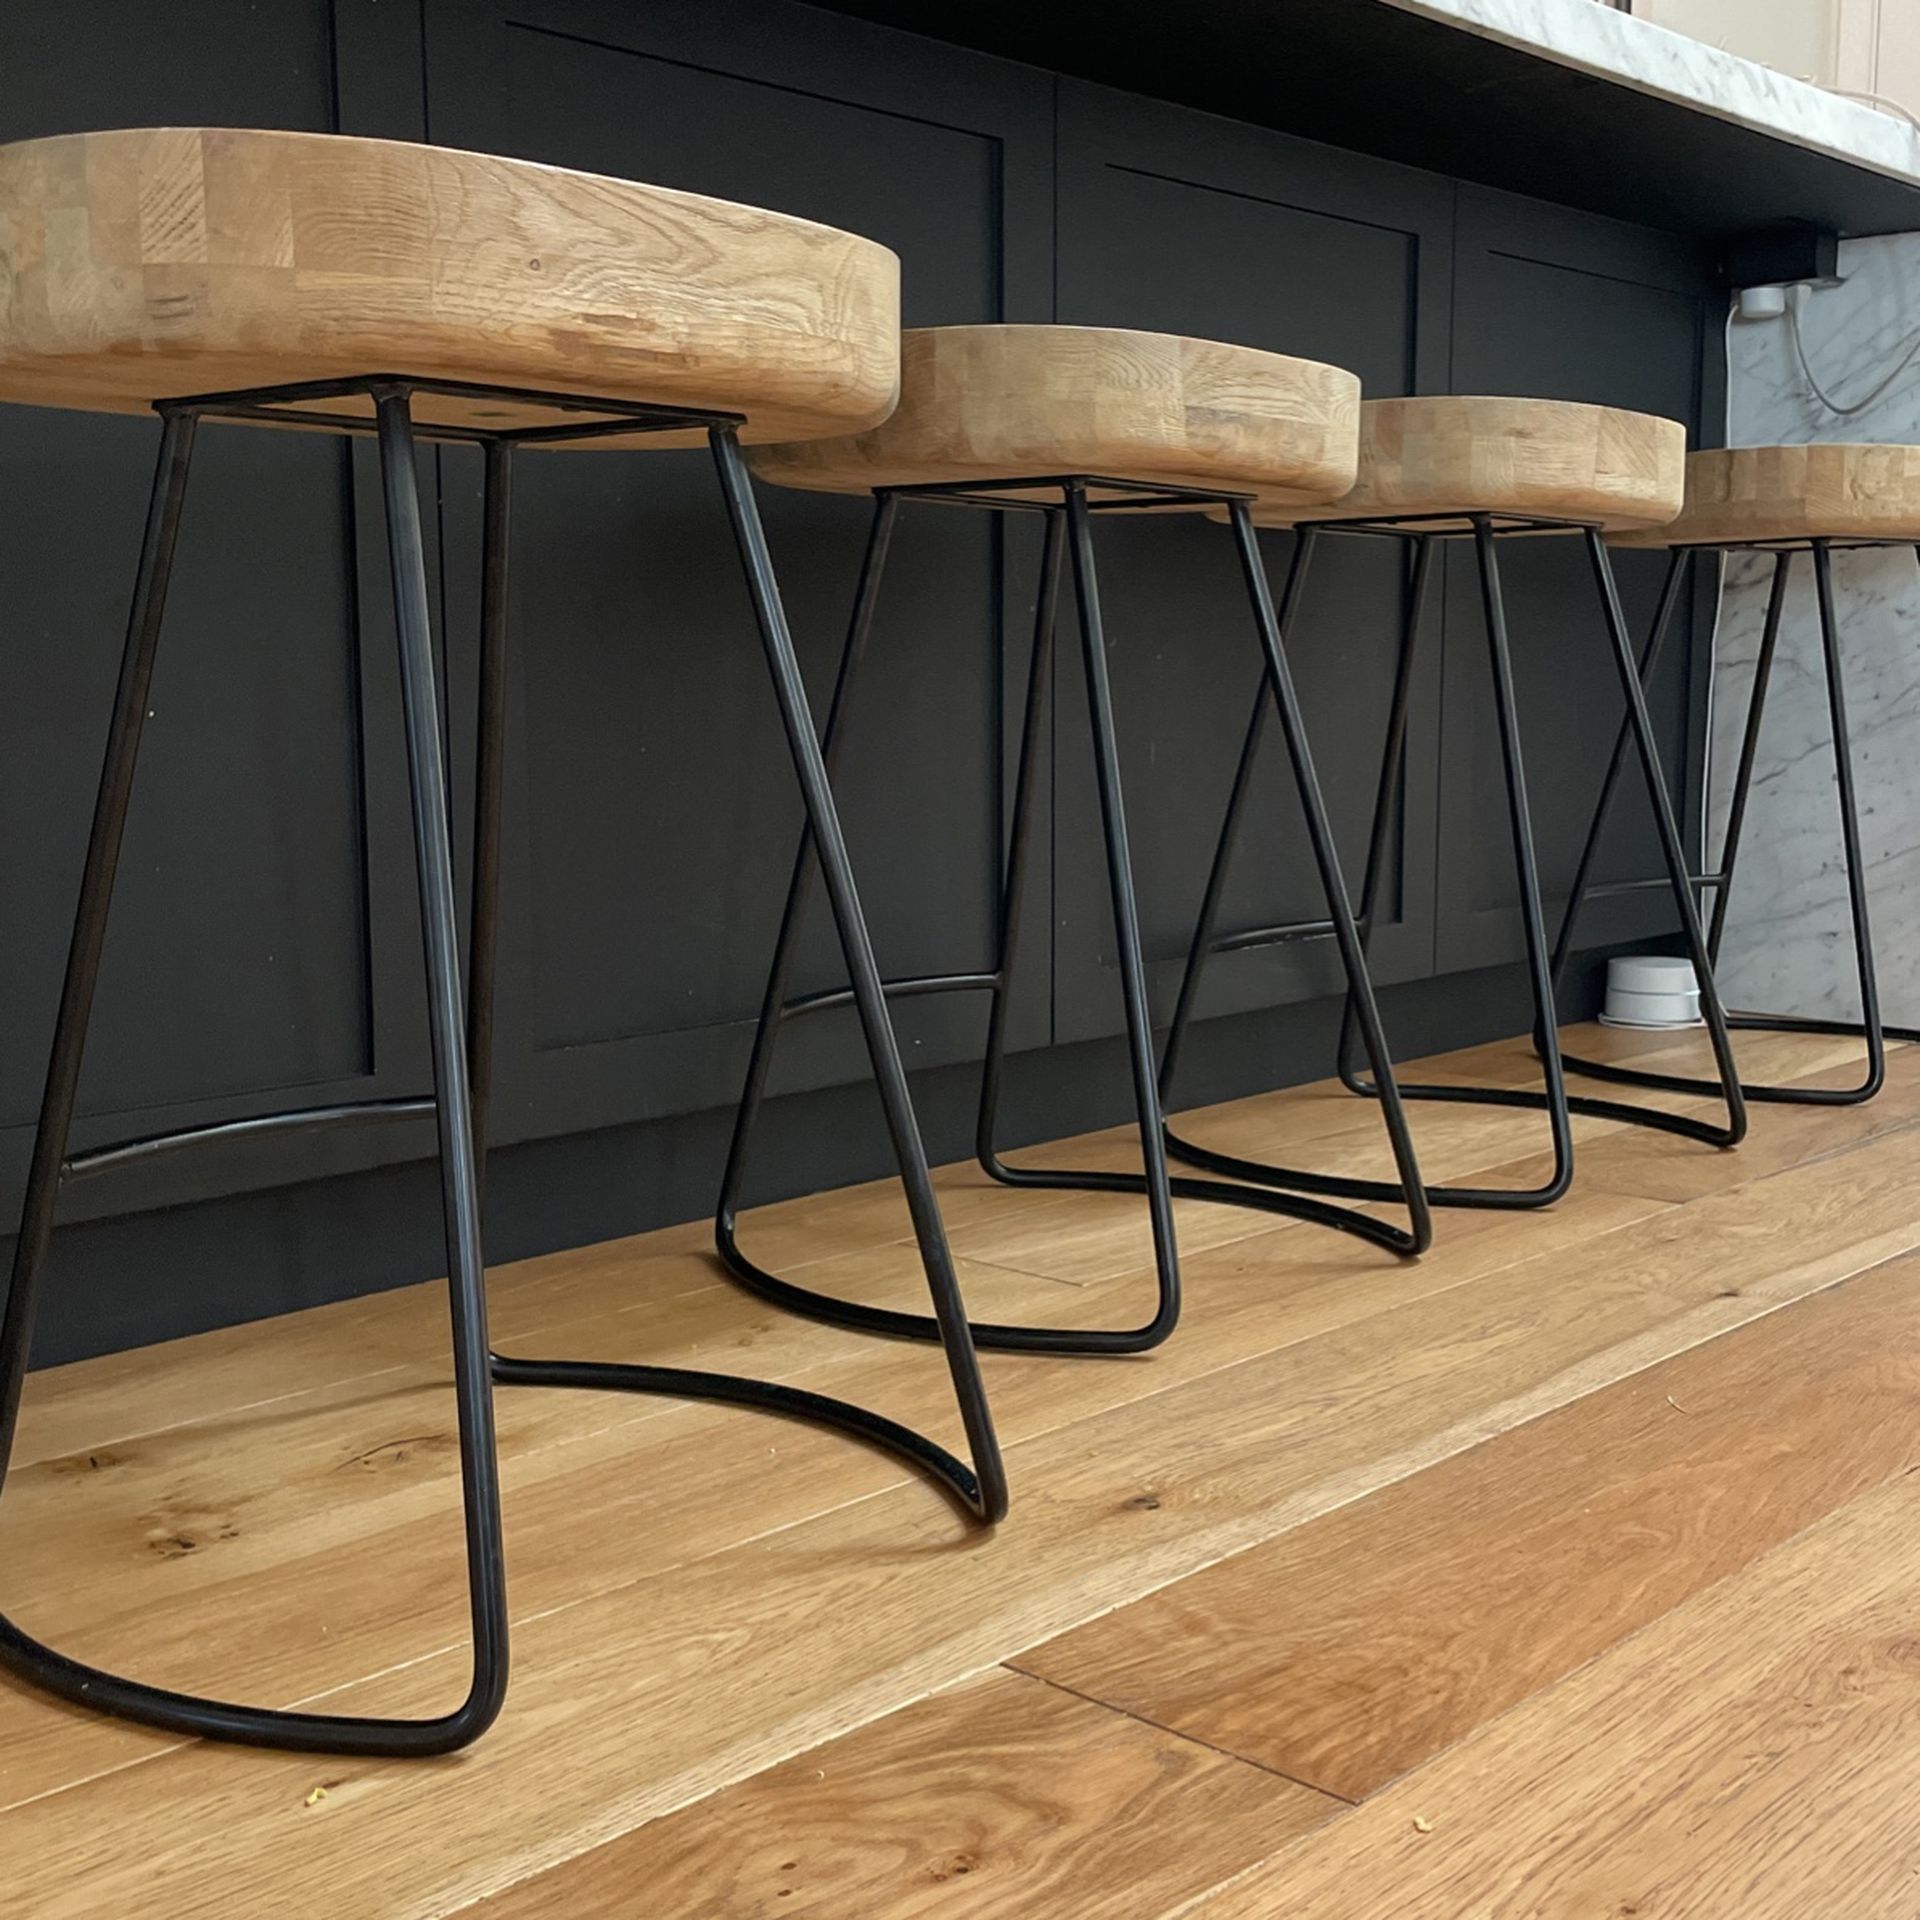 set of 4 PERFECT CONDITION RESTORATION HARDWARE counter stools